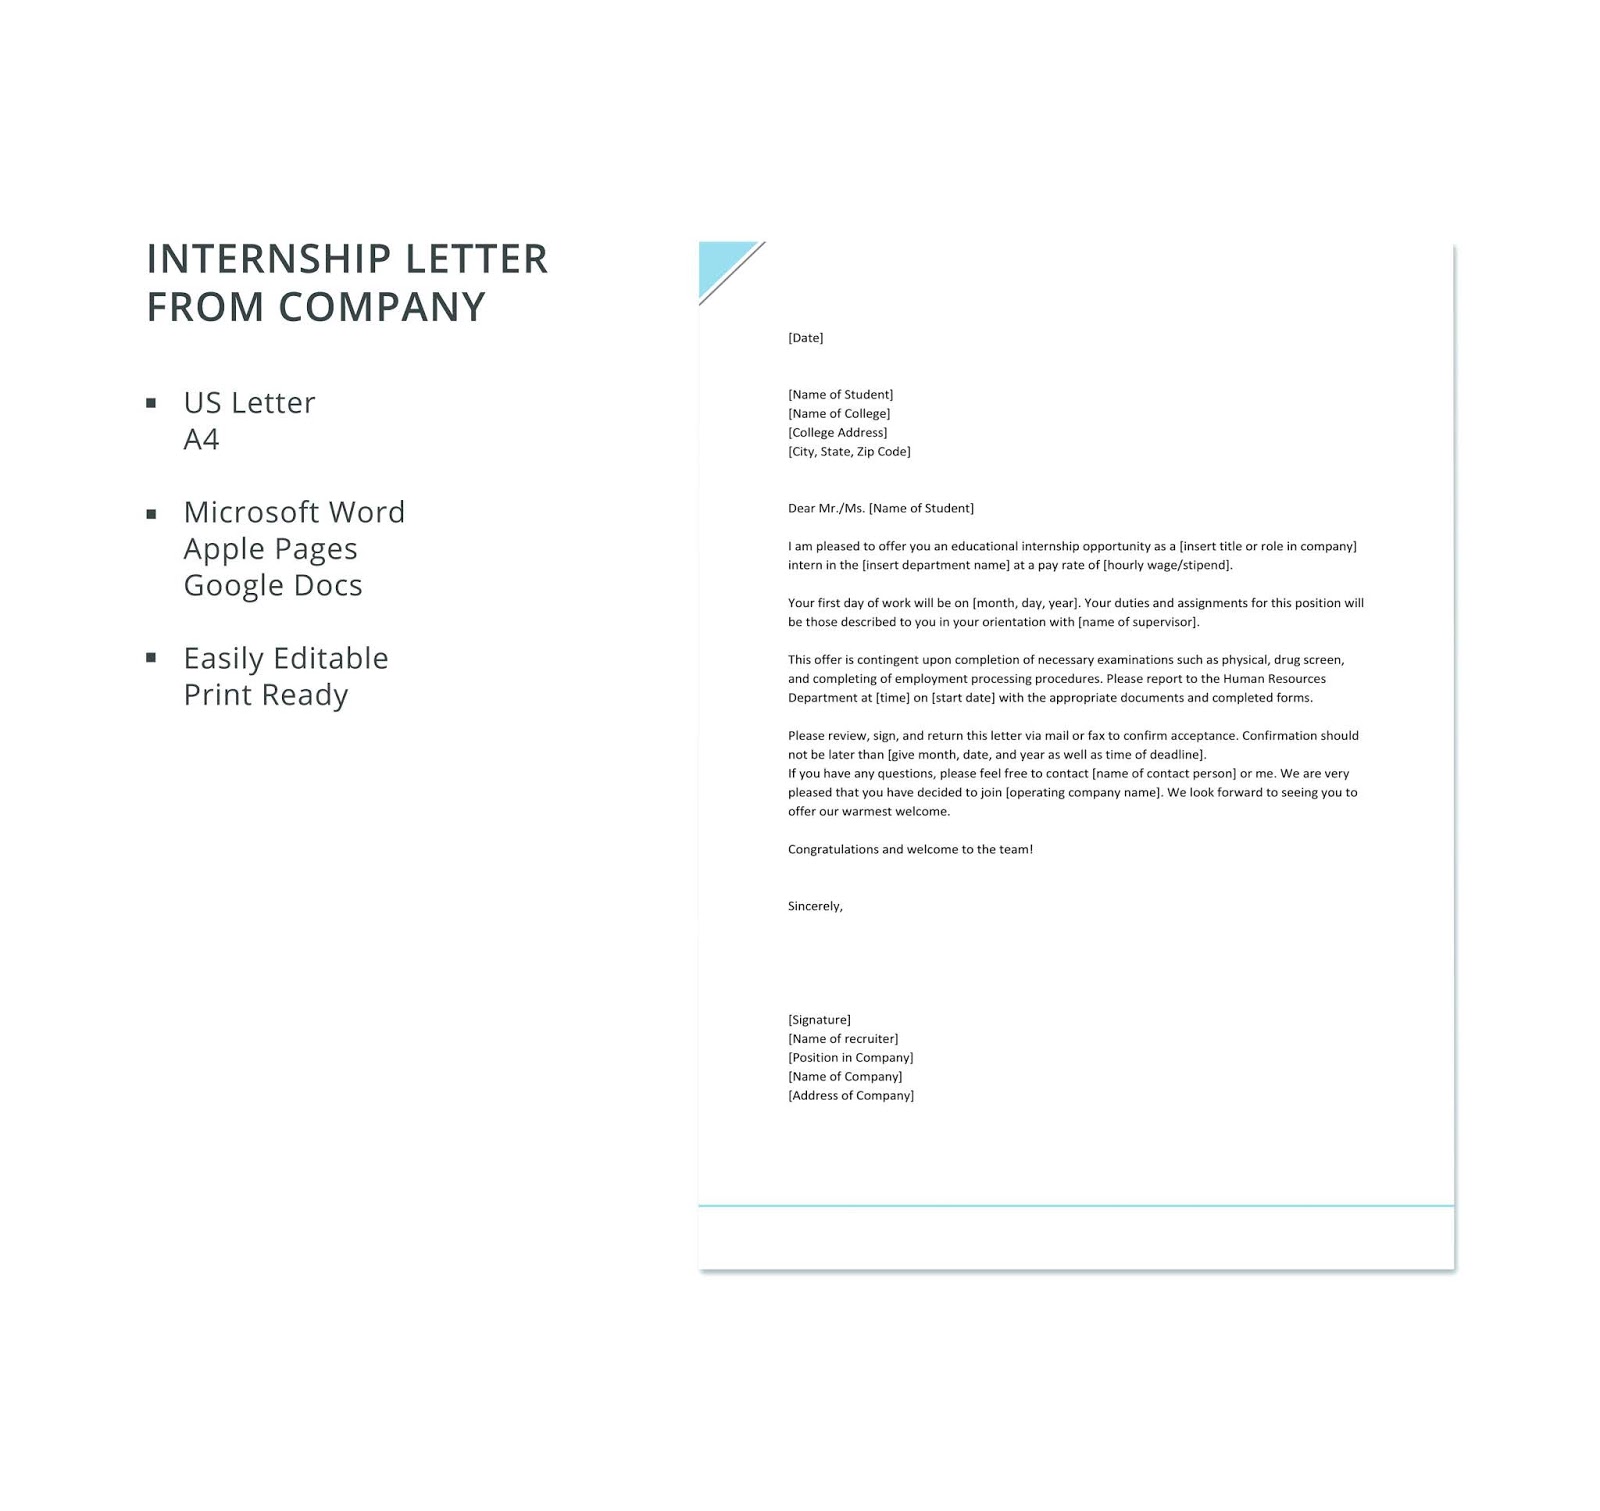 internship acceptance letter format from company to students 2019 , internship acceptance letter format from company to students, internship acceptance letter format from company 2020, internship letter format from company to students,